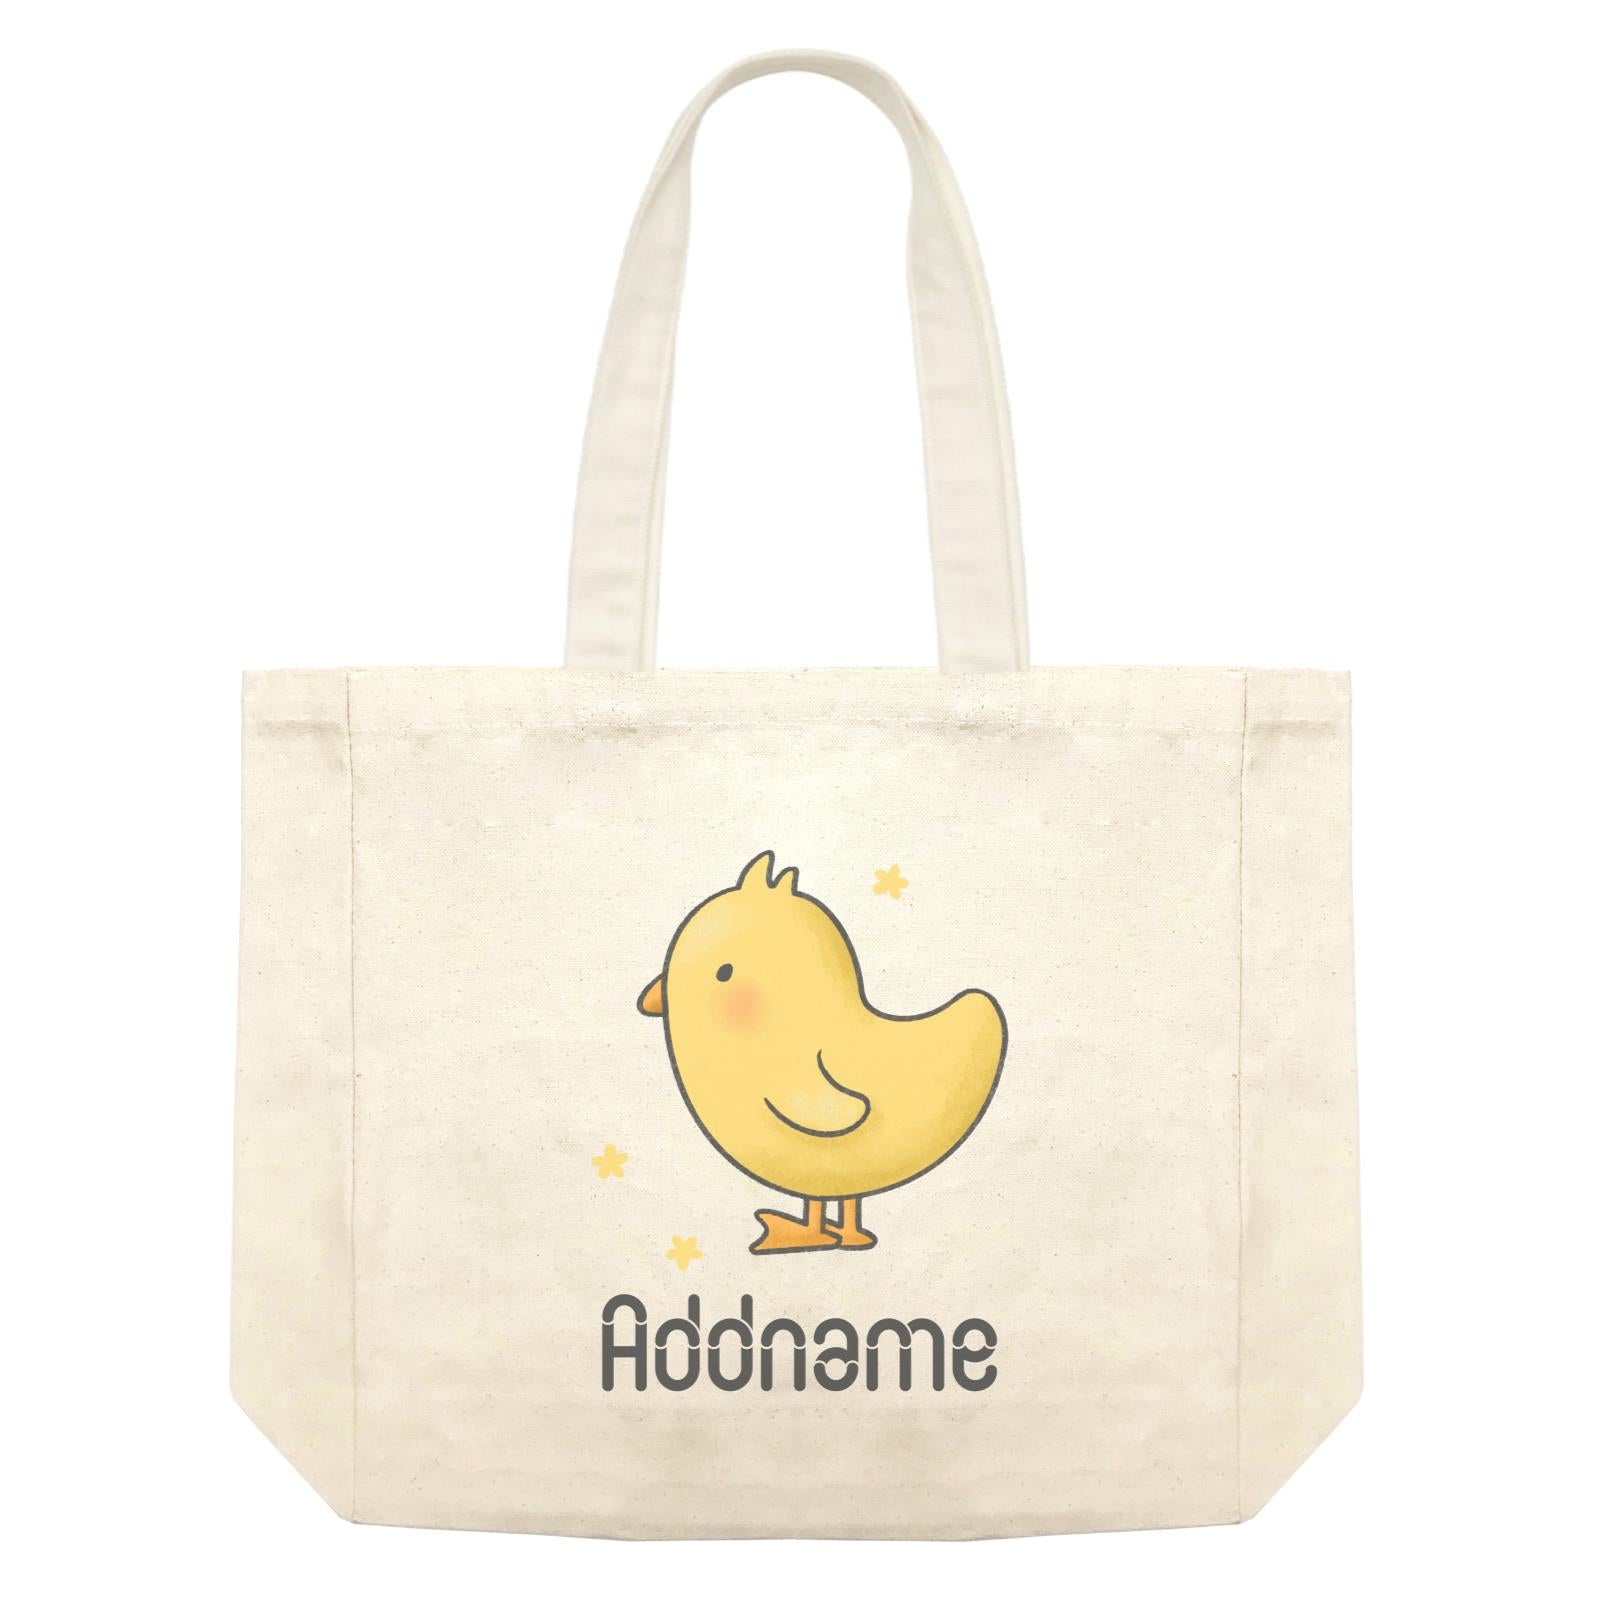 Cute Hand Drawn Style Chick Addname Shopping Bag